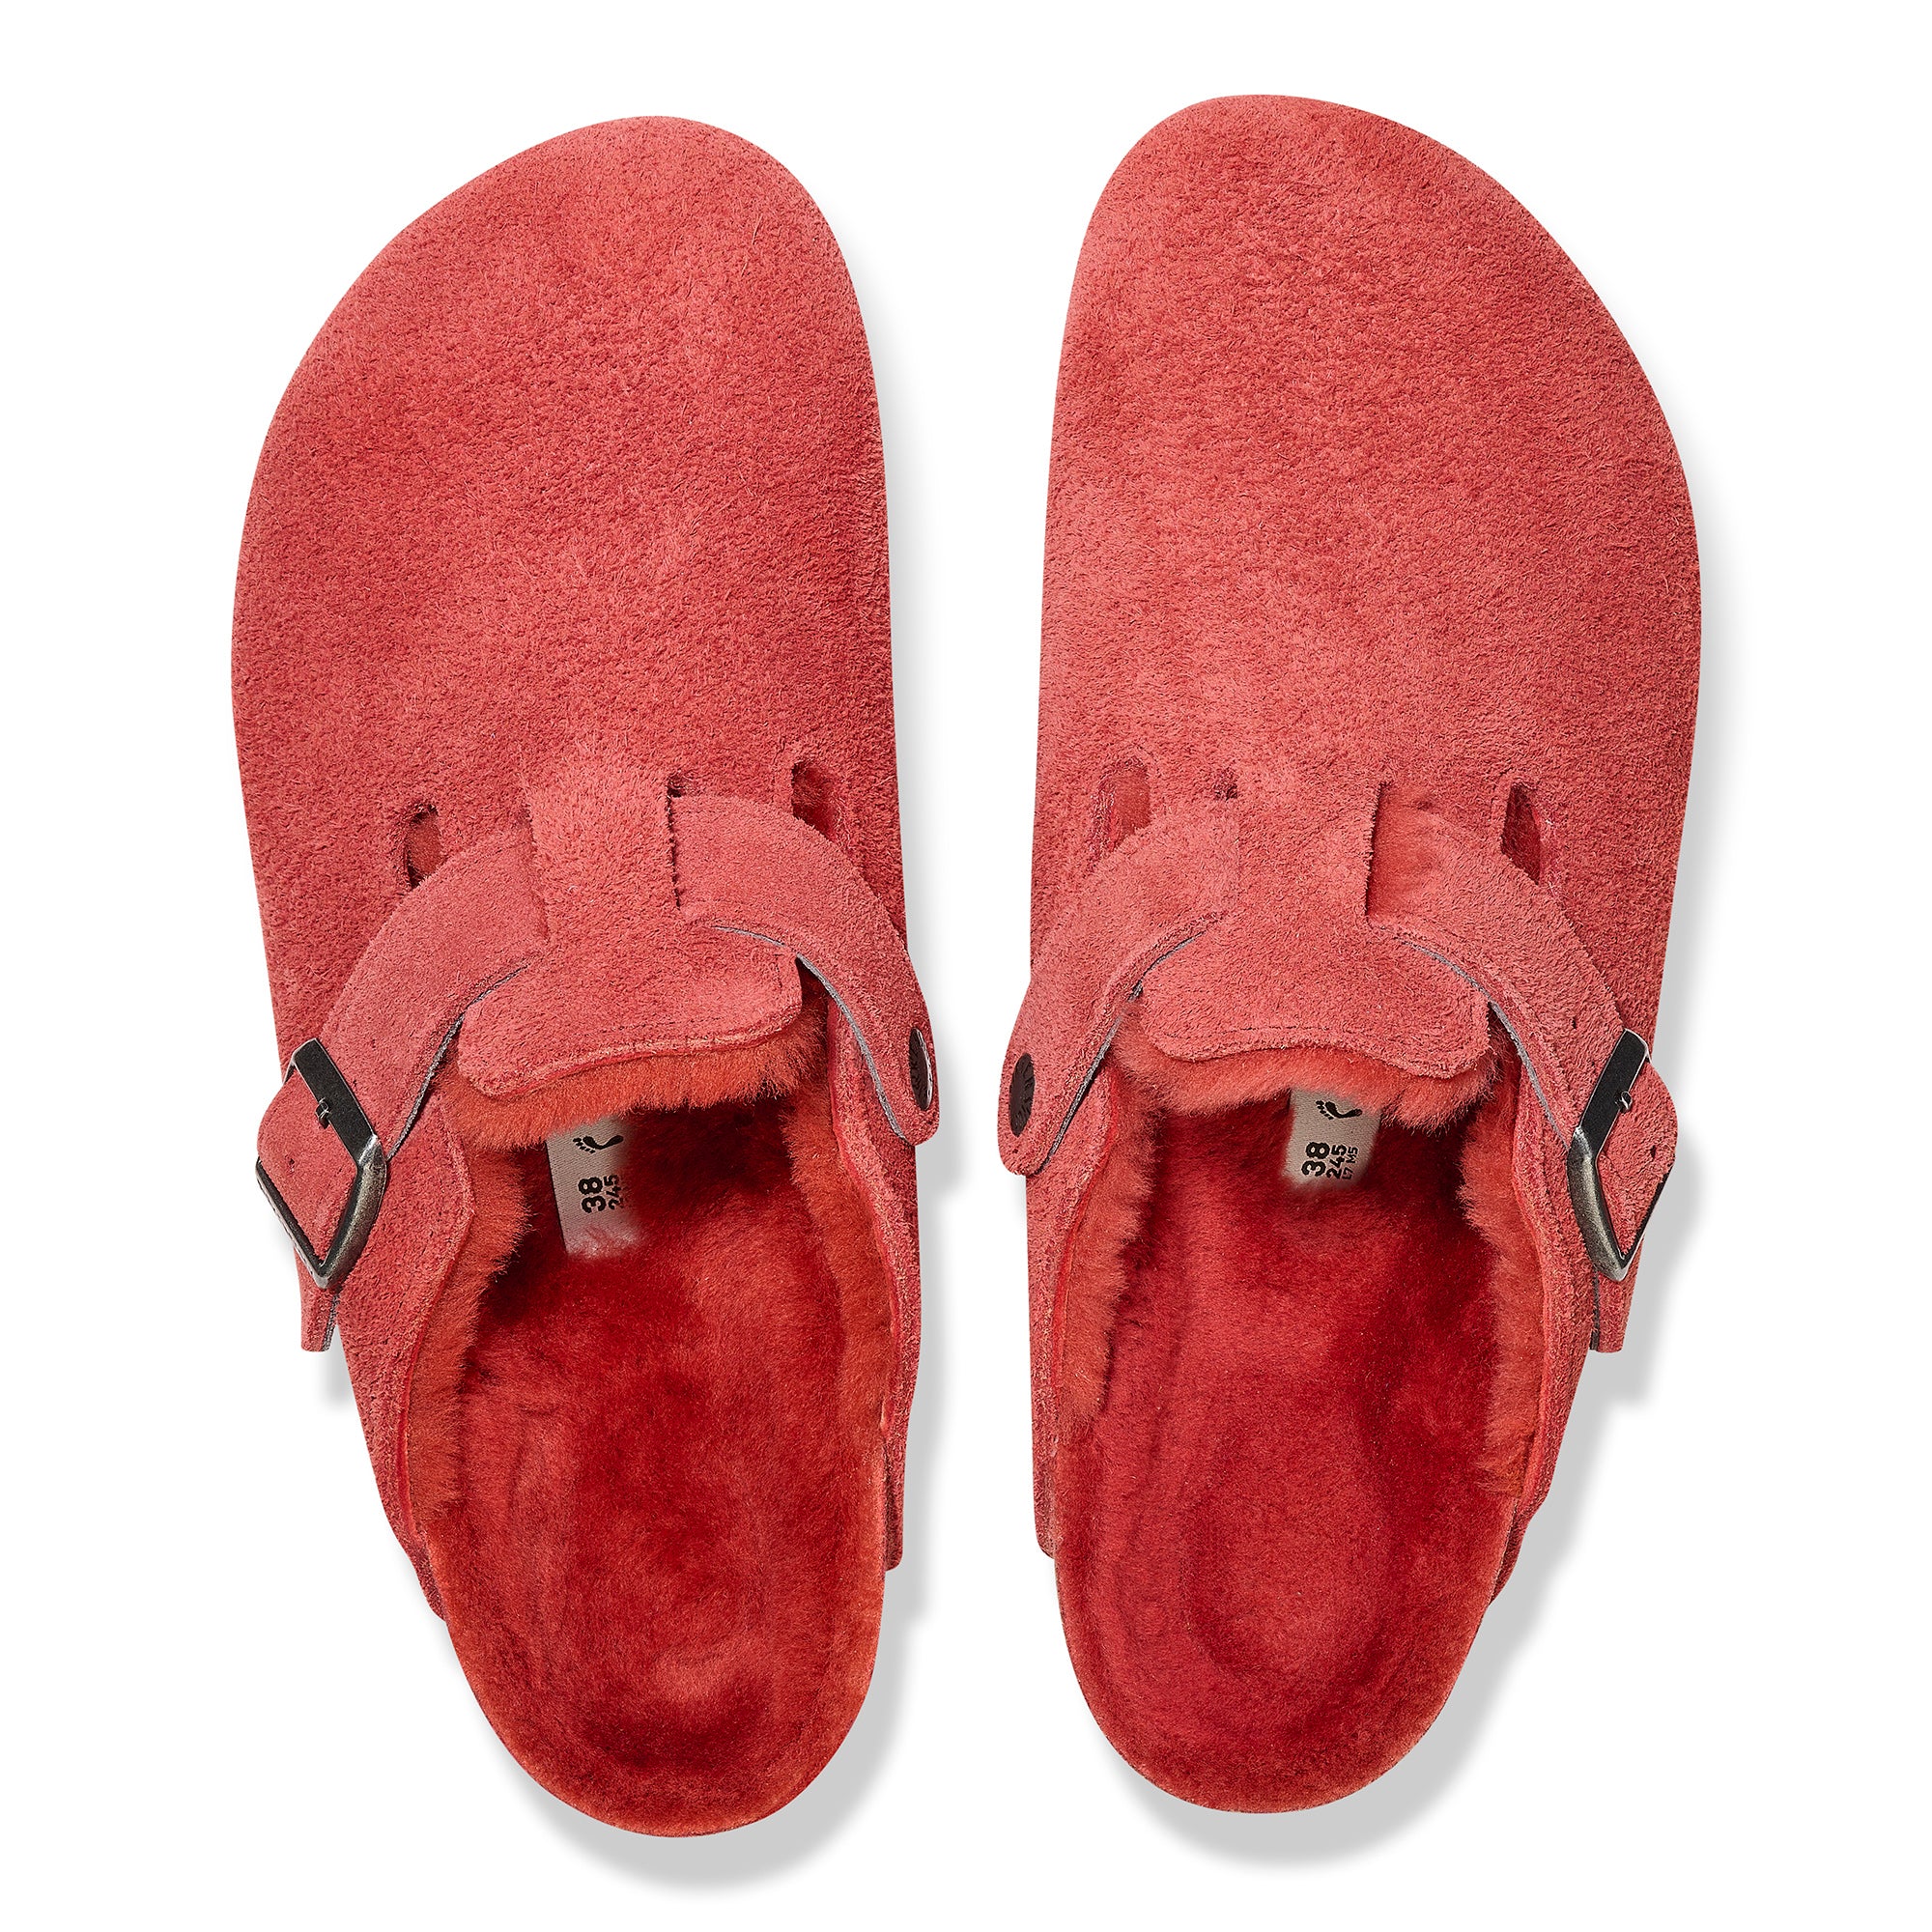 Birkenstock Limited Edition Boston sienna red suede/sienna red shearling